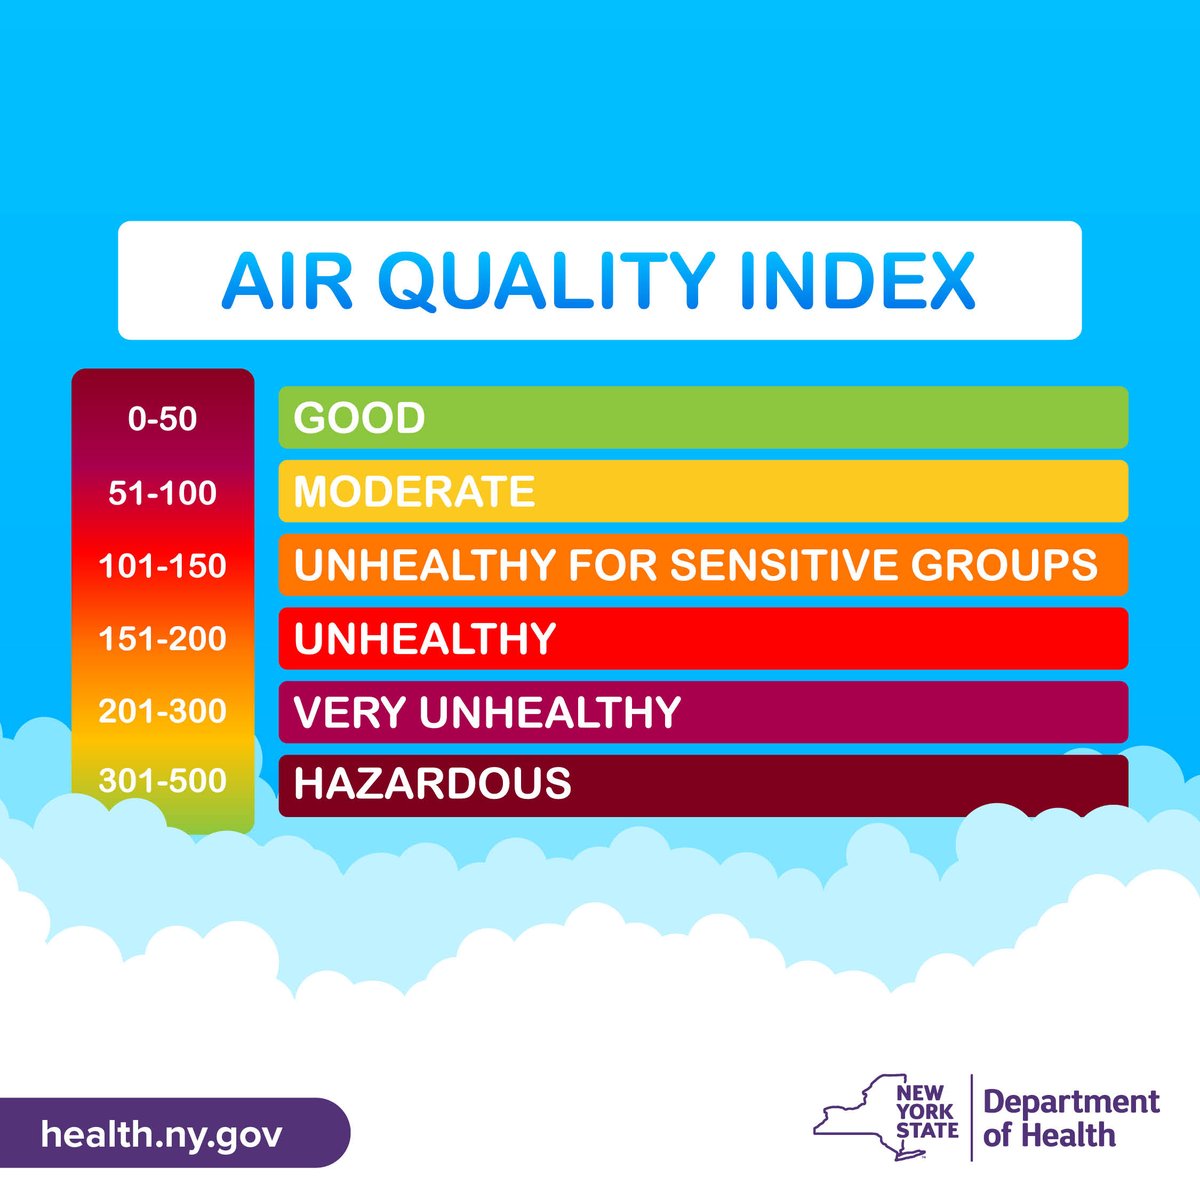 Be sure to check the Air Quality Index before heading outdoors. Certain groups of people, including those with respiratory or heart problems, pregnant people and those who work or exercise outdoors may be at risk. Check the AQI here: AirNow.gov.